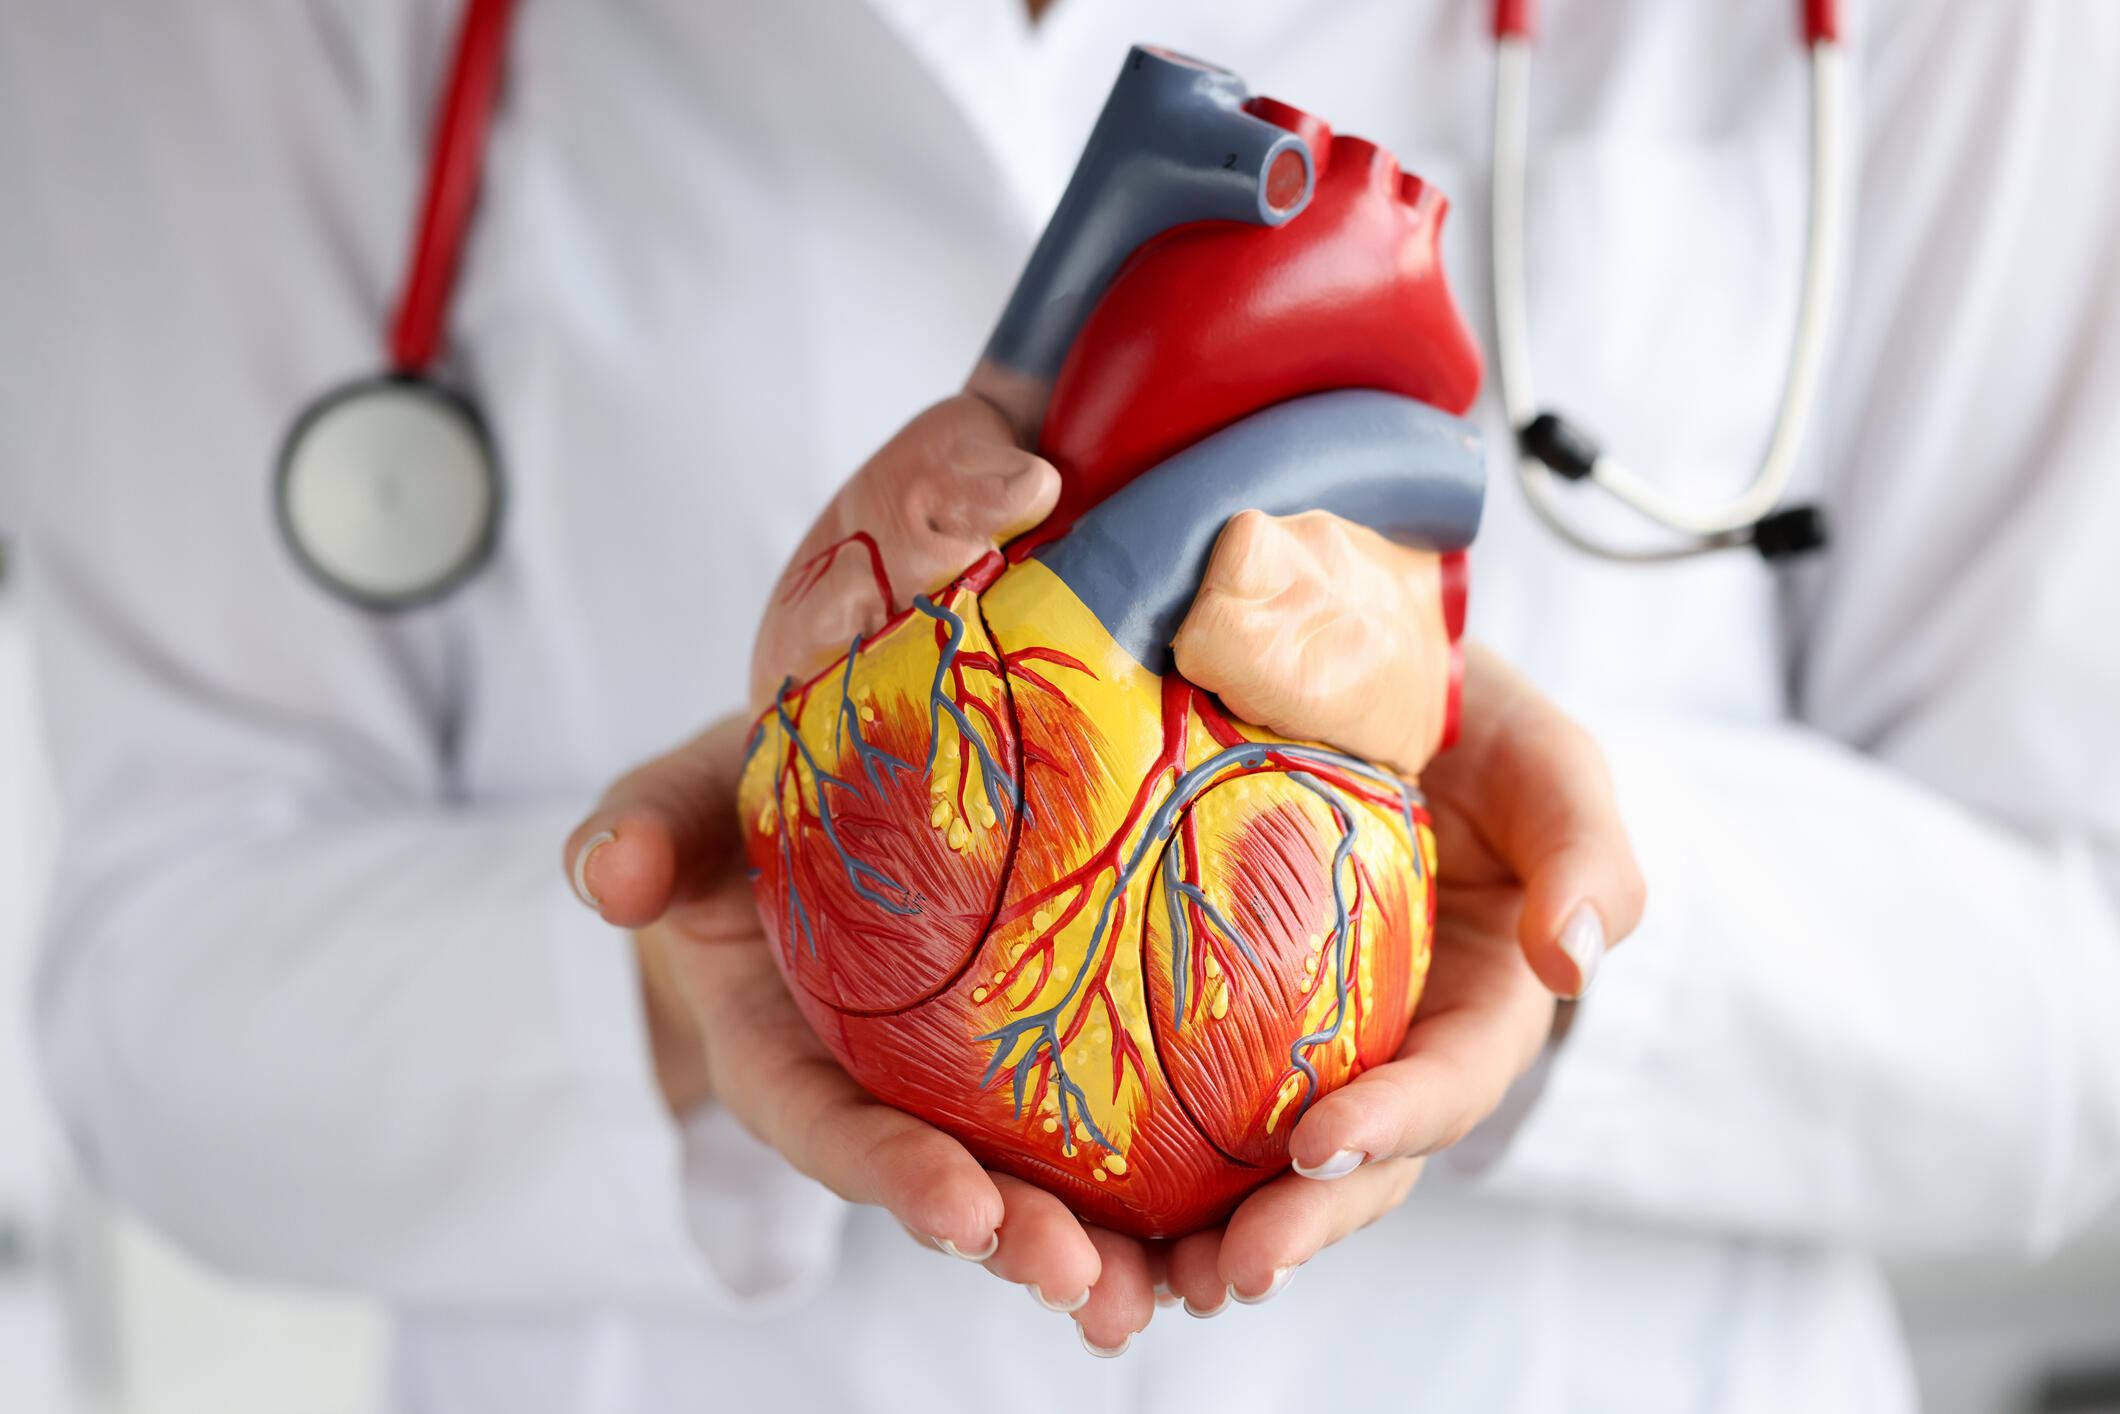 Someone wearing a lab coat and stethoscope holding an anatomical model of a heart in their hands 